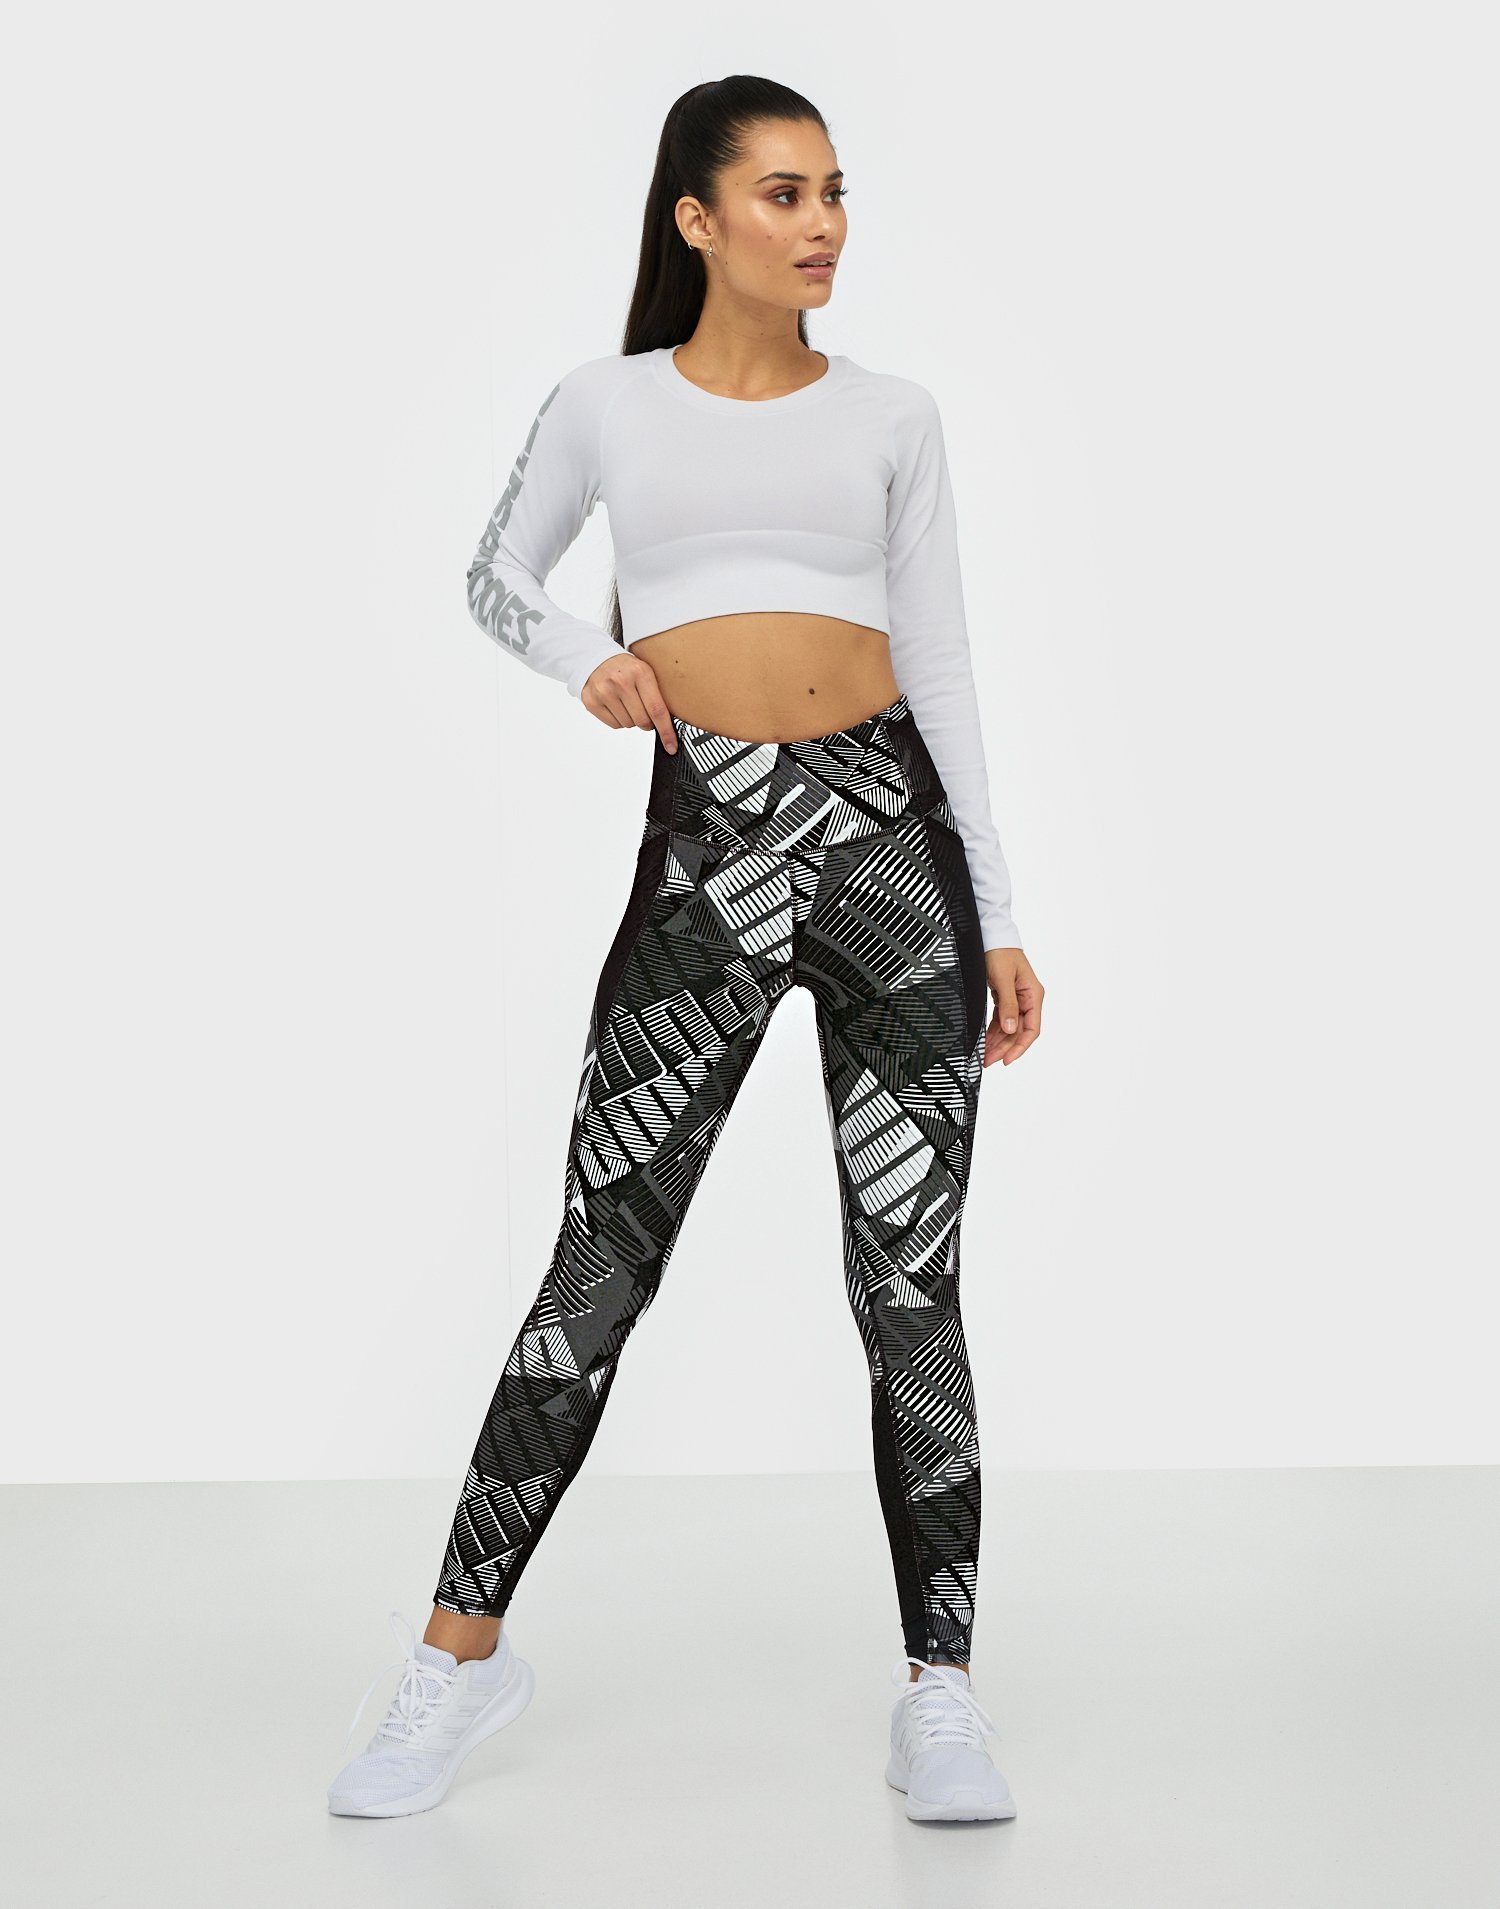 puma women's fitness collection